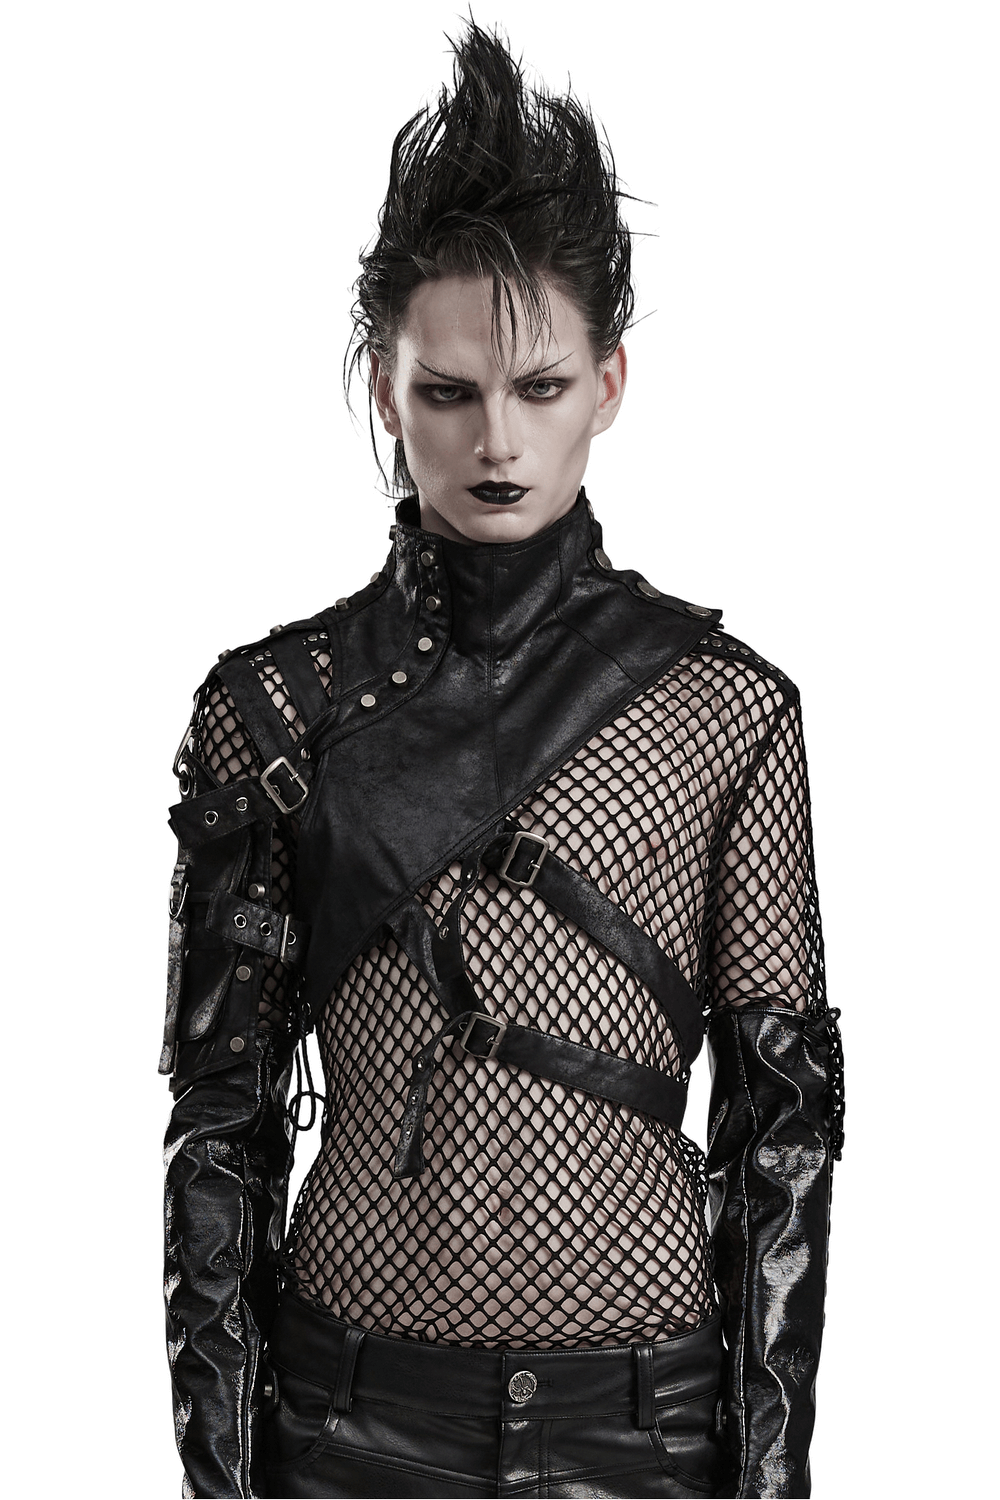 Edgy Shoulder Armor with Adjustable Buckles and Straps